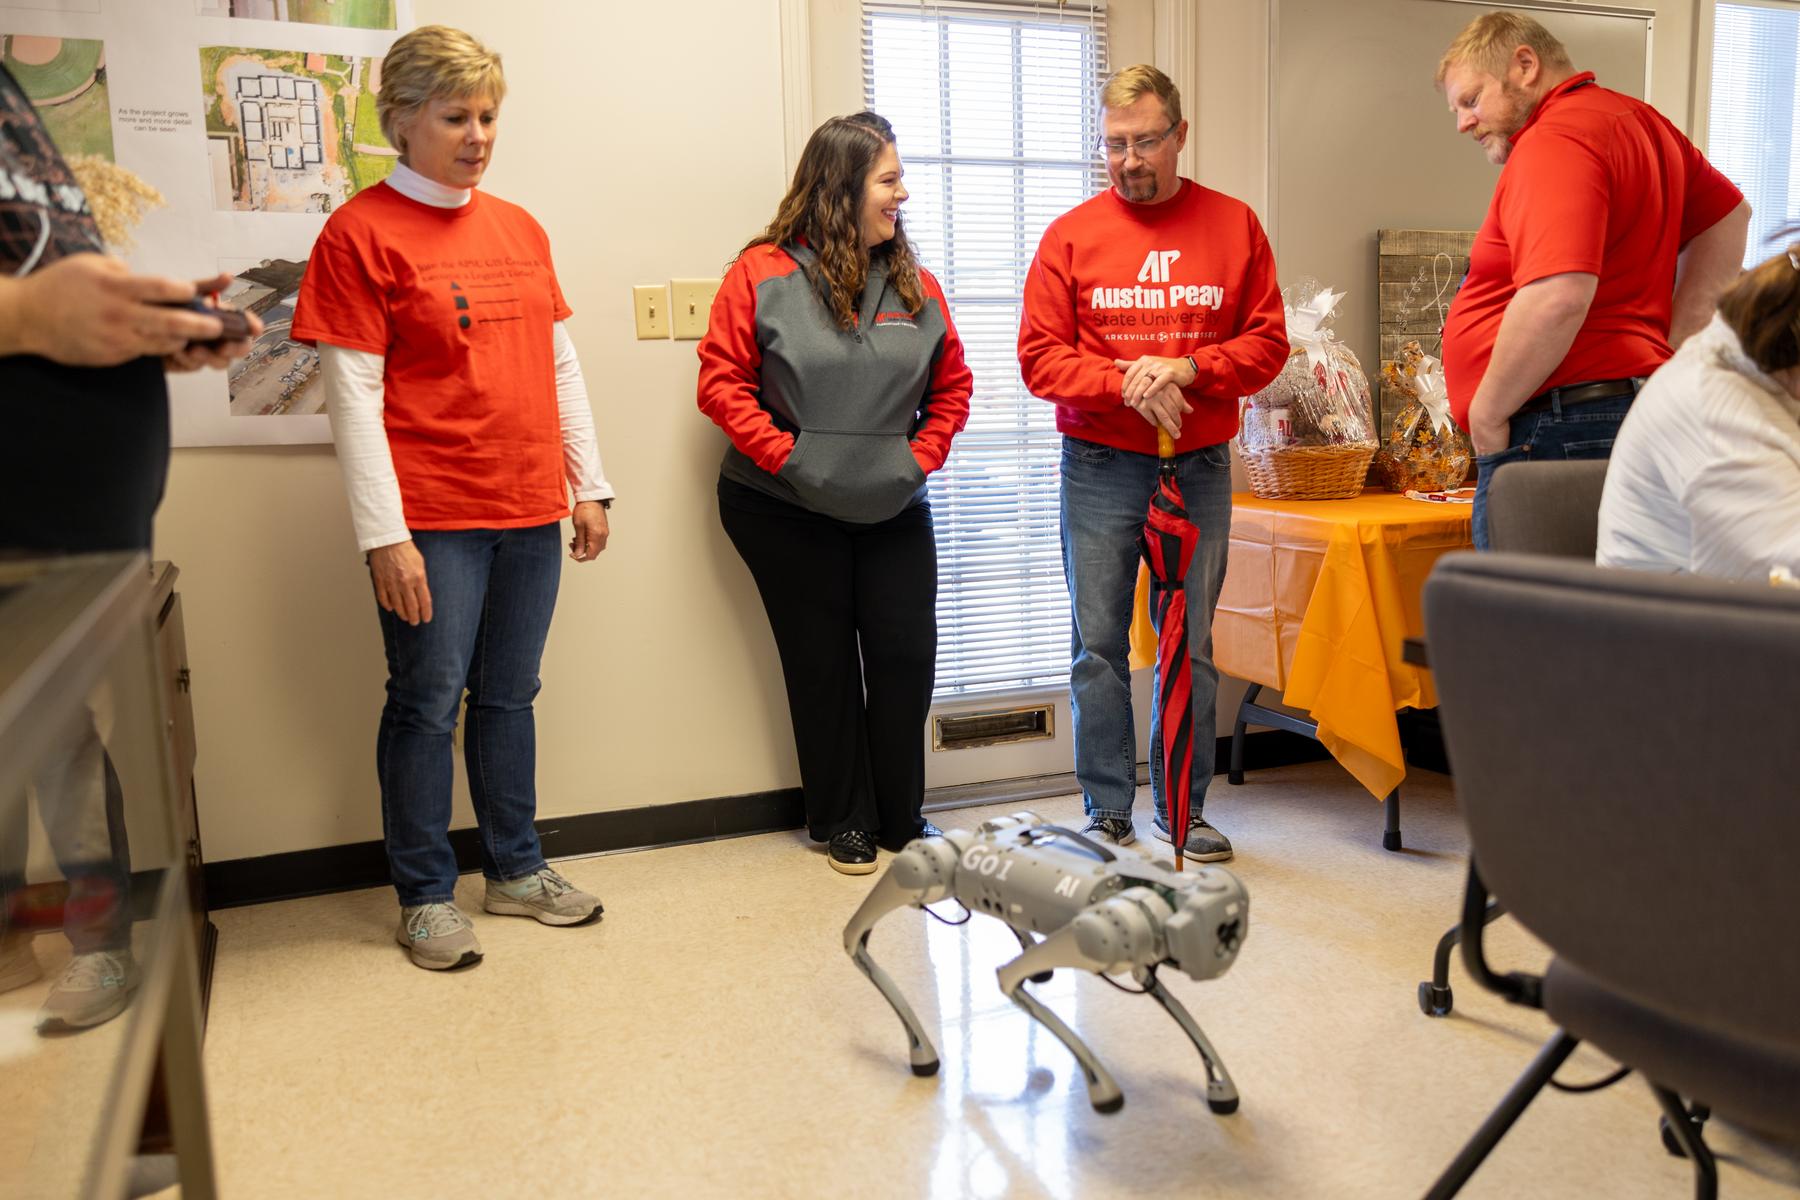 Robotic dog R2Peay2 entertains guests at the GIS Center.